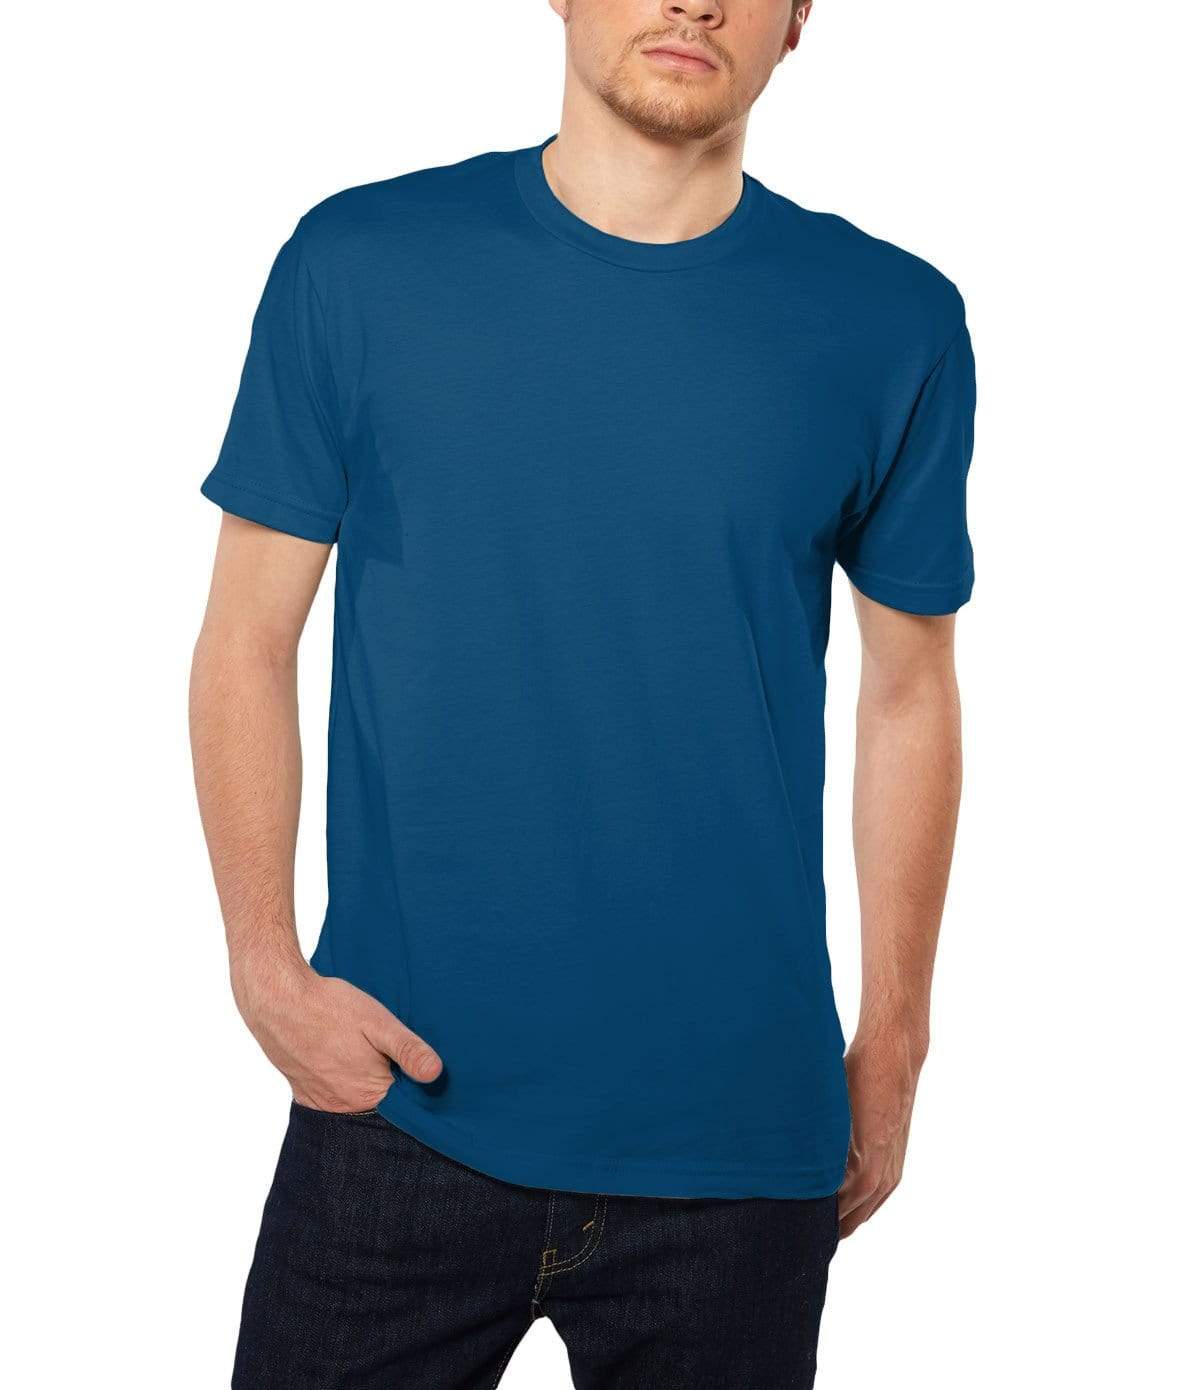 Nayked Apparel Men Men's Ridiculously Soft Short Sleeve Crew Neck 100% Cotton T-Shirt | Classic